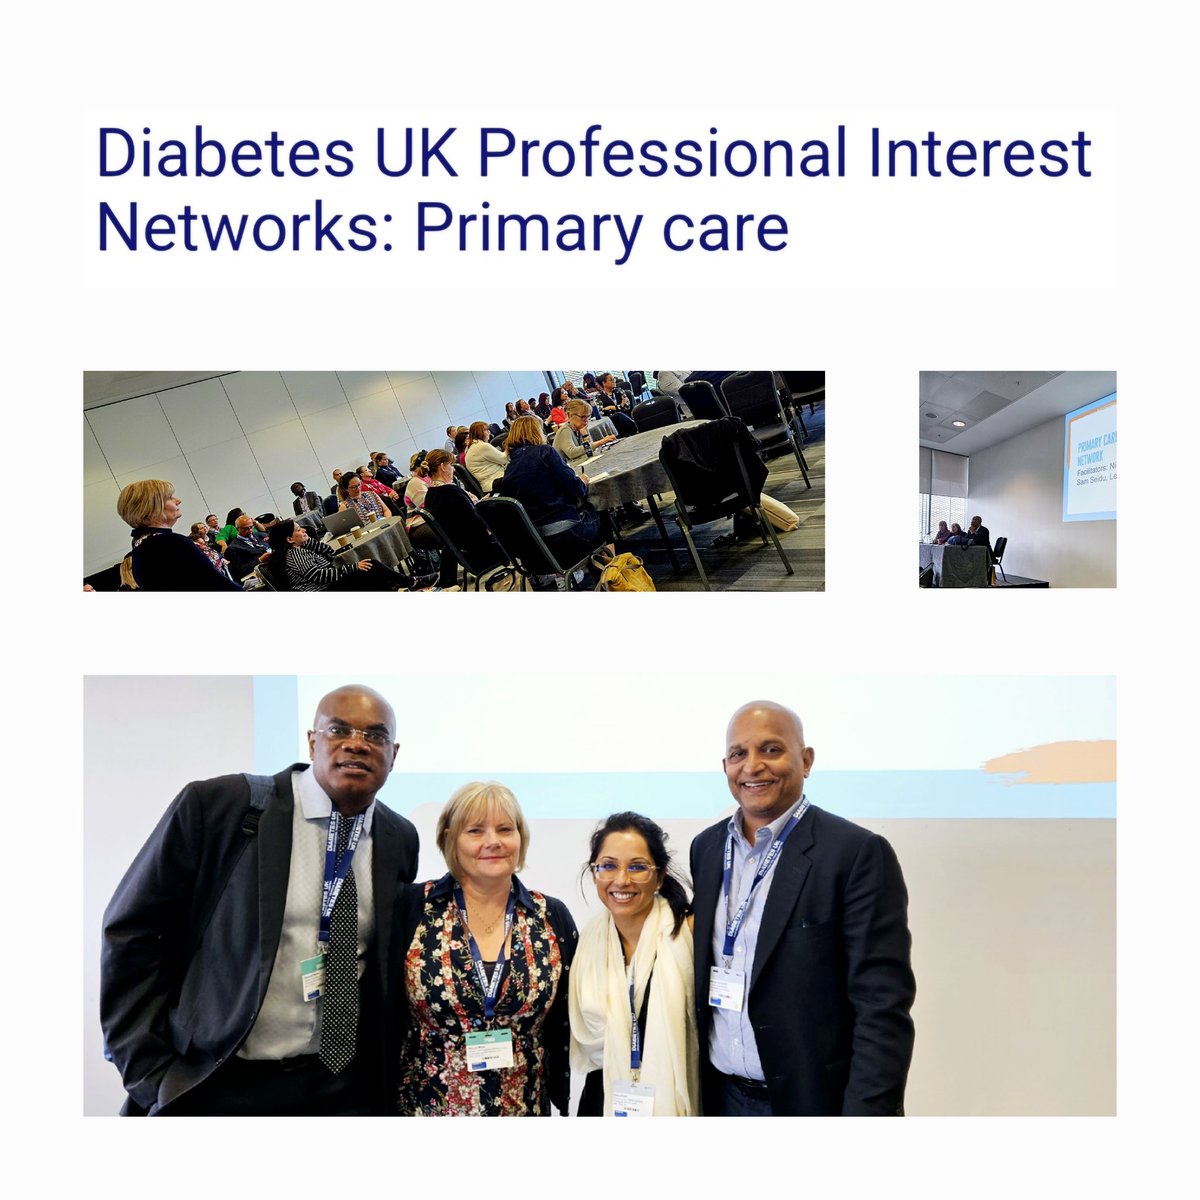 full house @DiabetesUKProf #primarycare with our excellent chairs / panel @scelee1 @nicmiln 😉 @drnkan @AliaGilani